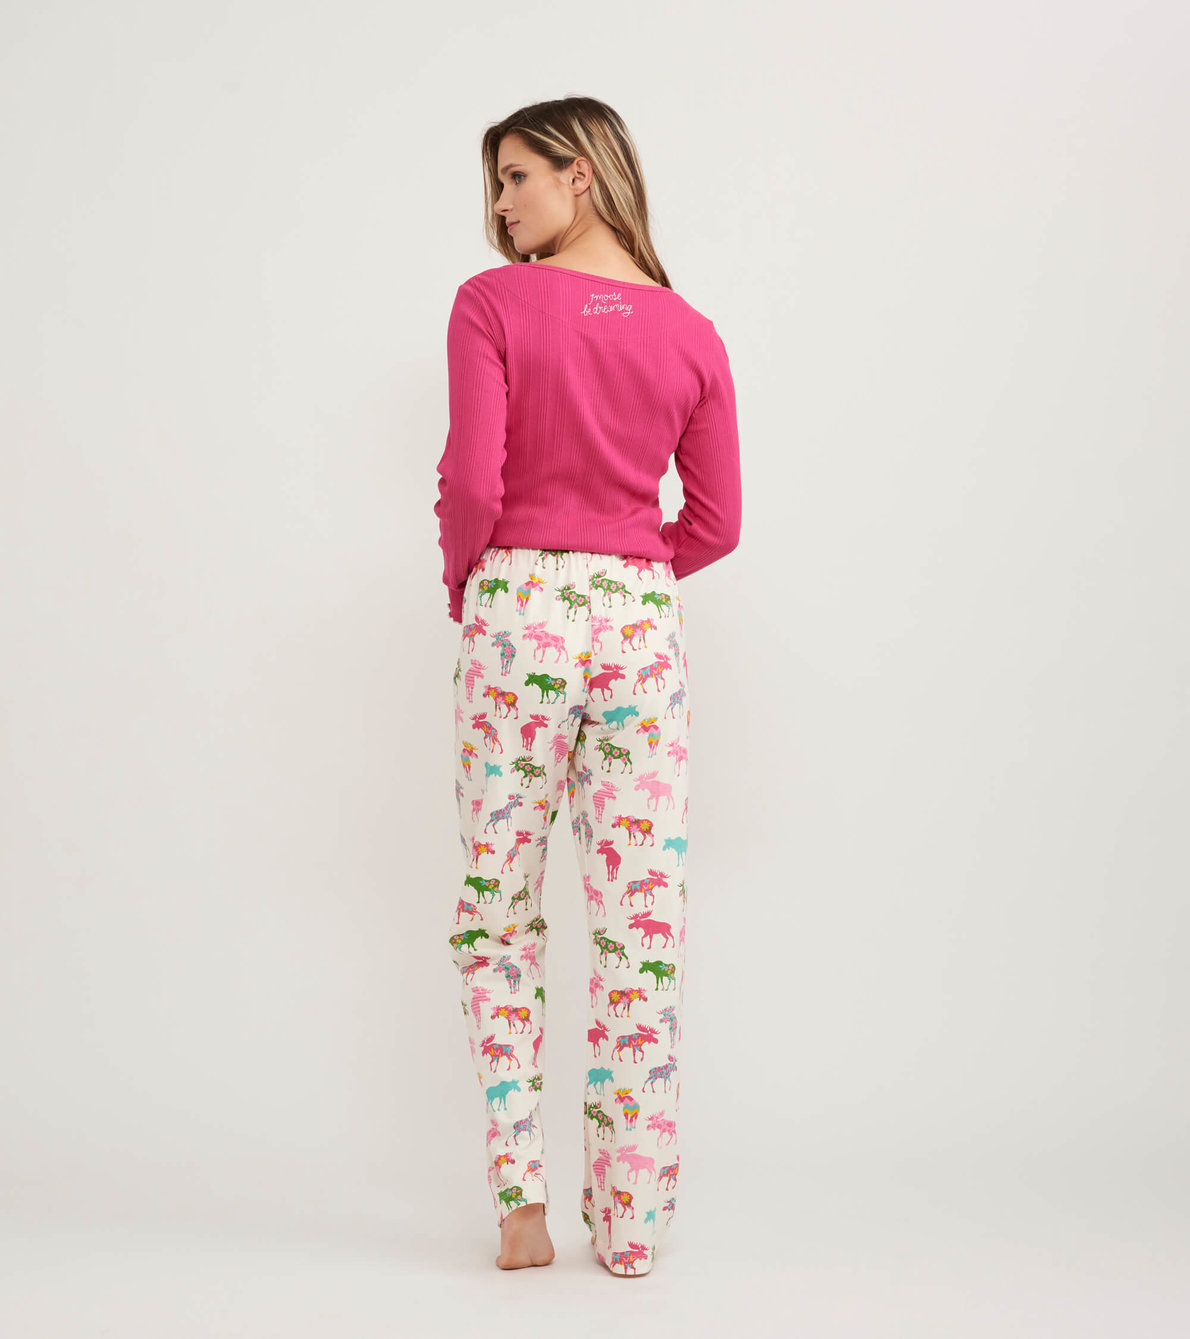 View larger image of Patterned Moose Women's Tee and Pants Pajama Separates